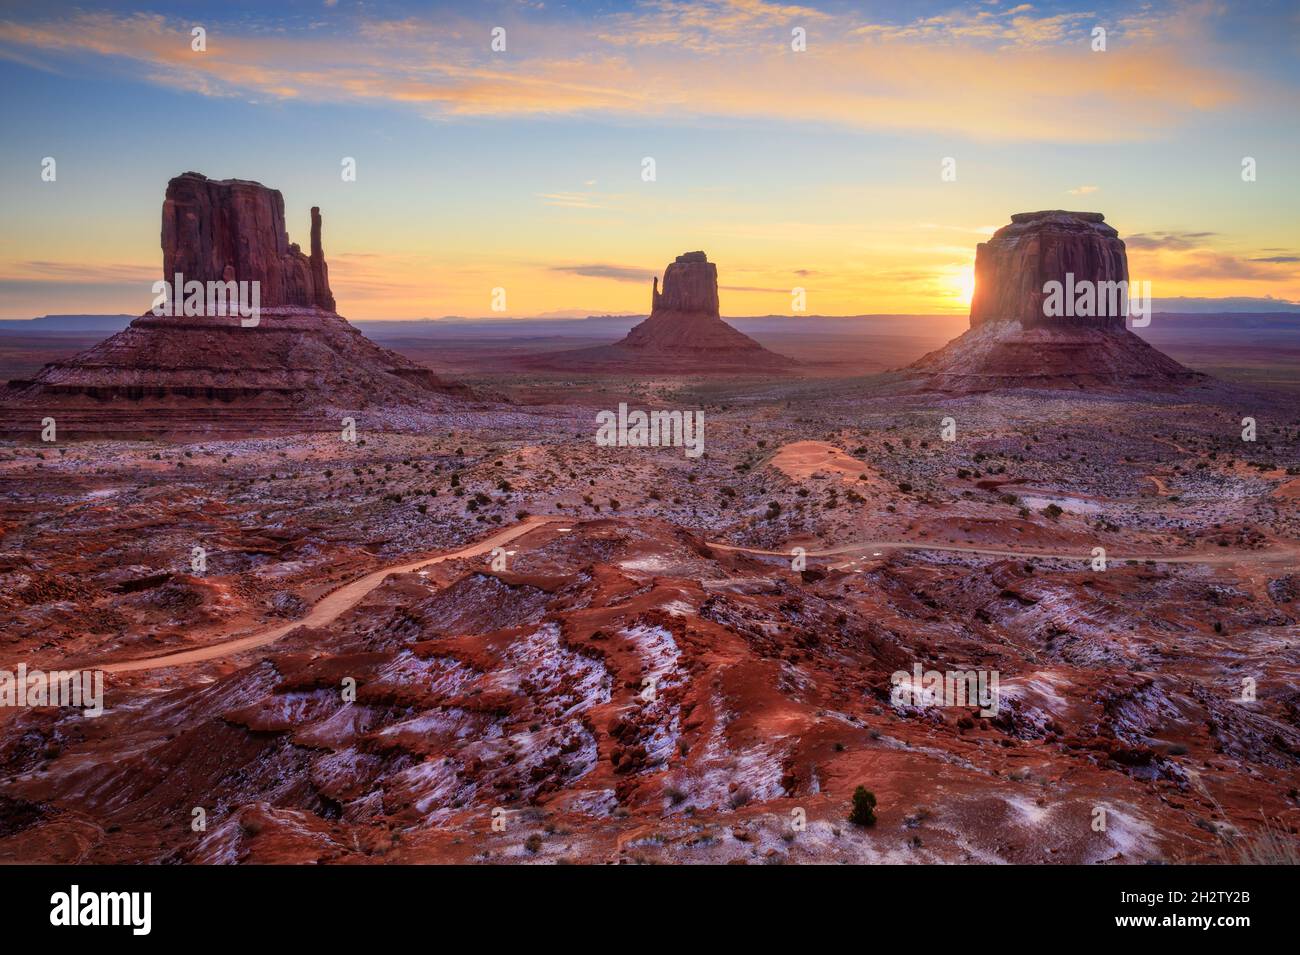 Sun rise behind butte at Monument Valley scenic viewpoint, Arizona Stock Photo